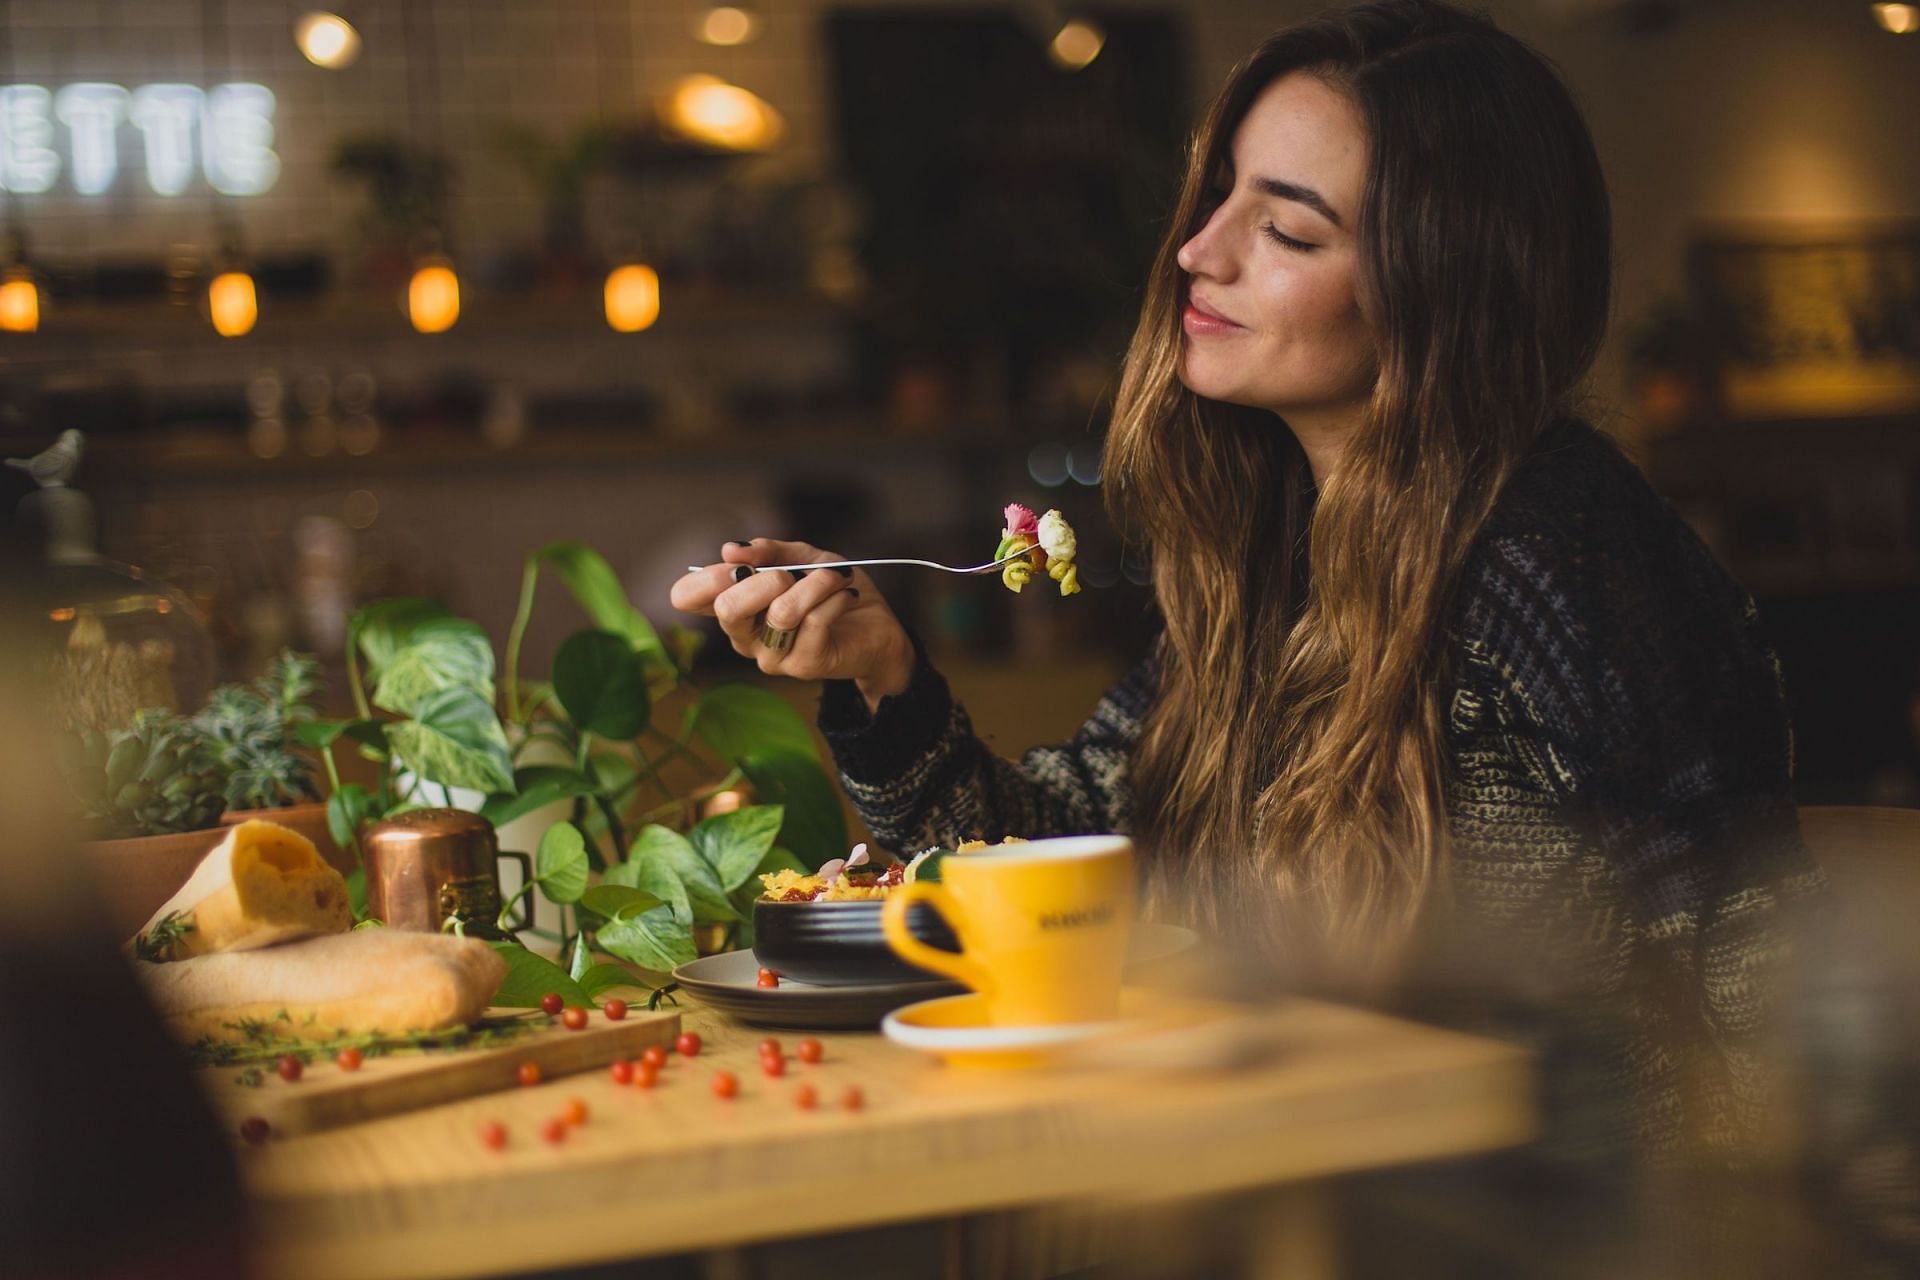 Take time to enjoy your meal (Image via Unsplash/Pablo Merch&aacute;n Montes)